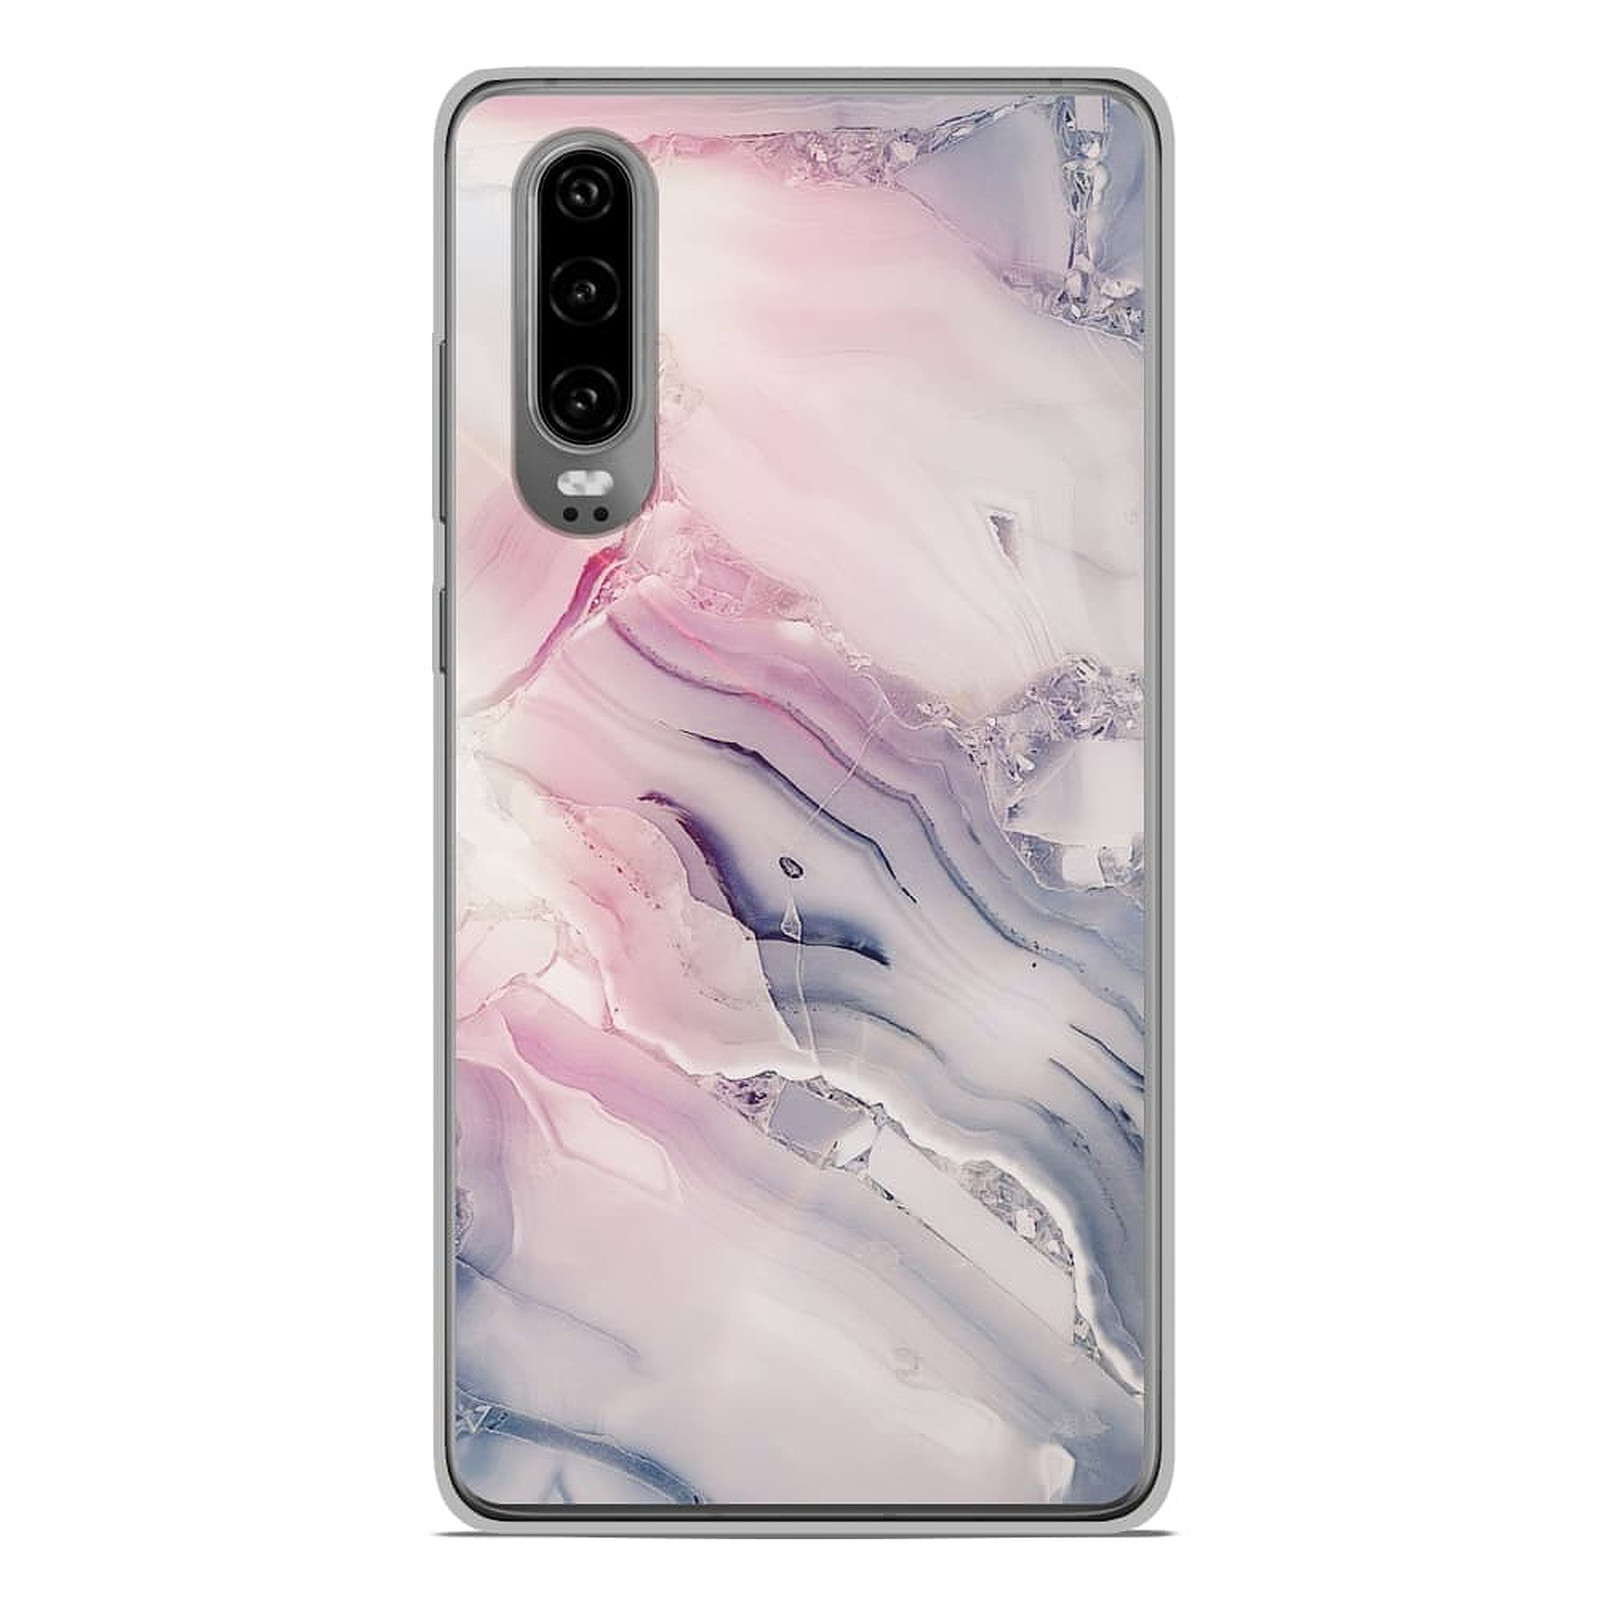 1001 Coques Coque silicone gel Huawei P30 motif Zoom sur Pierre Claire - Coque telephone 1001Coques